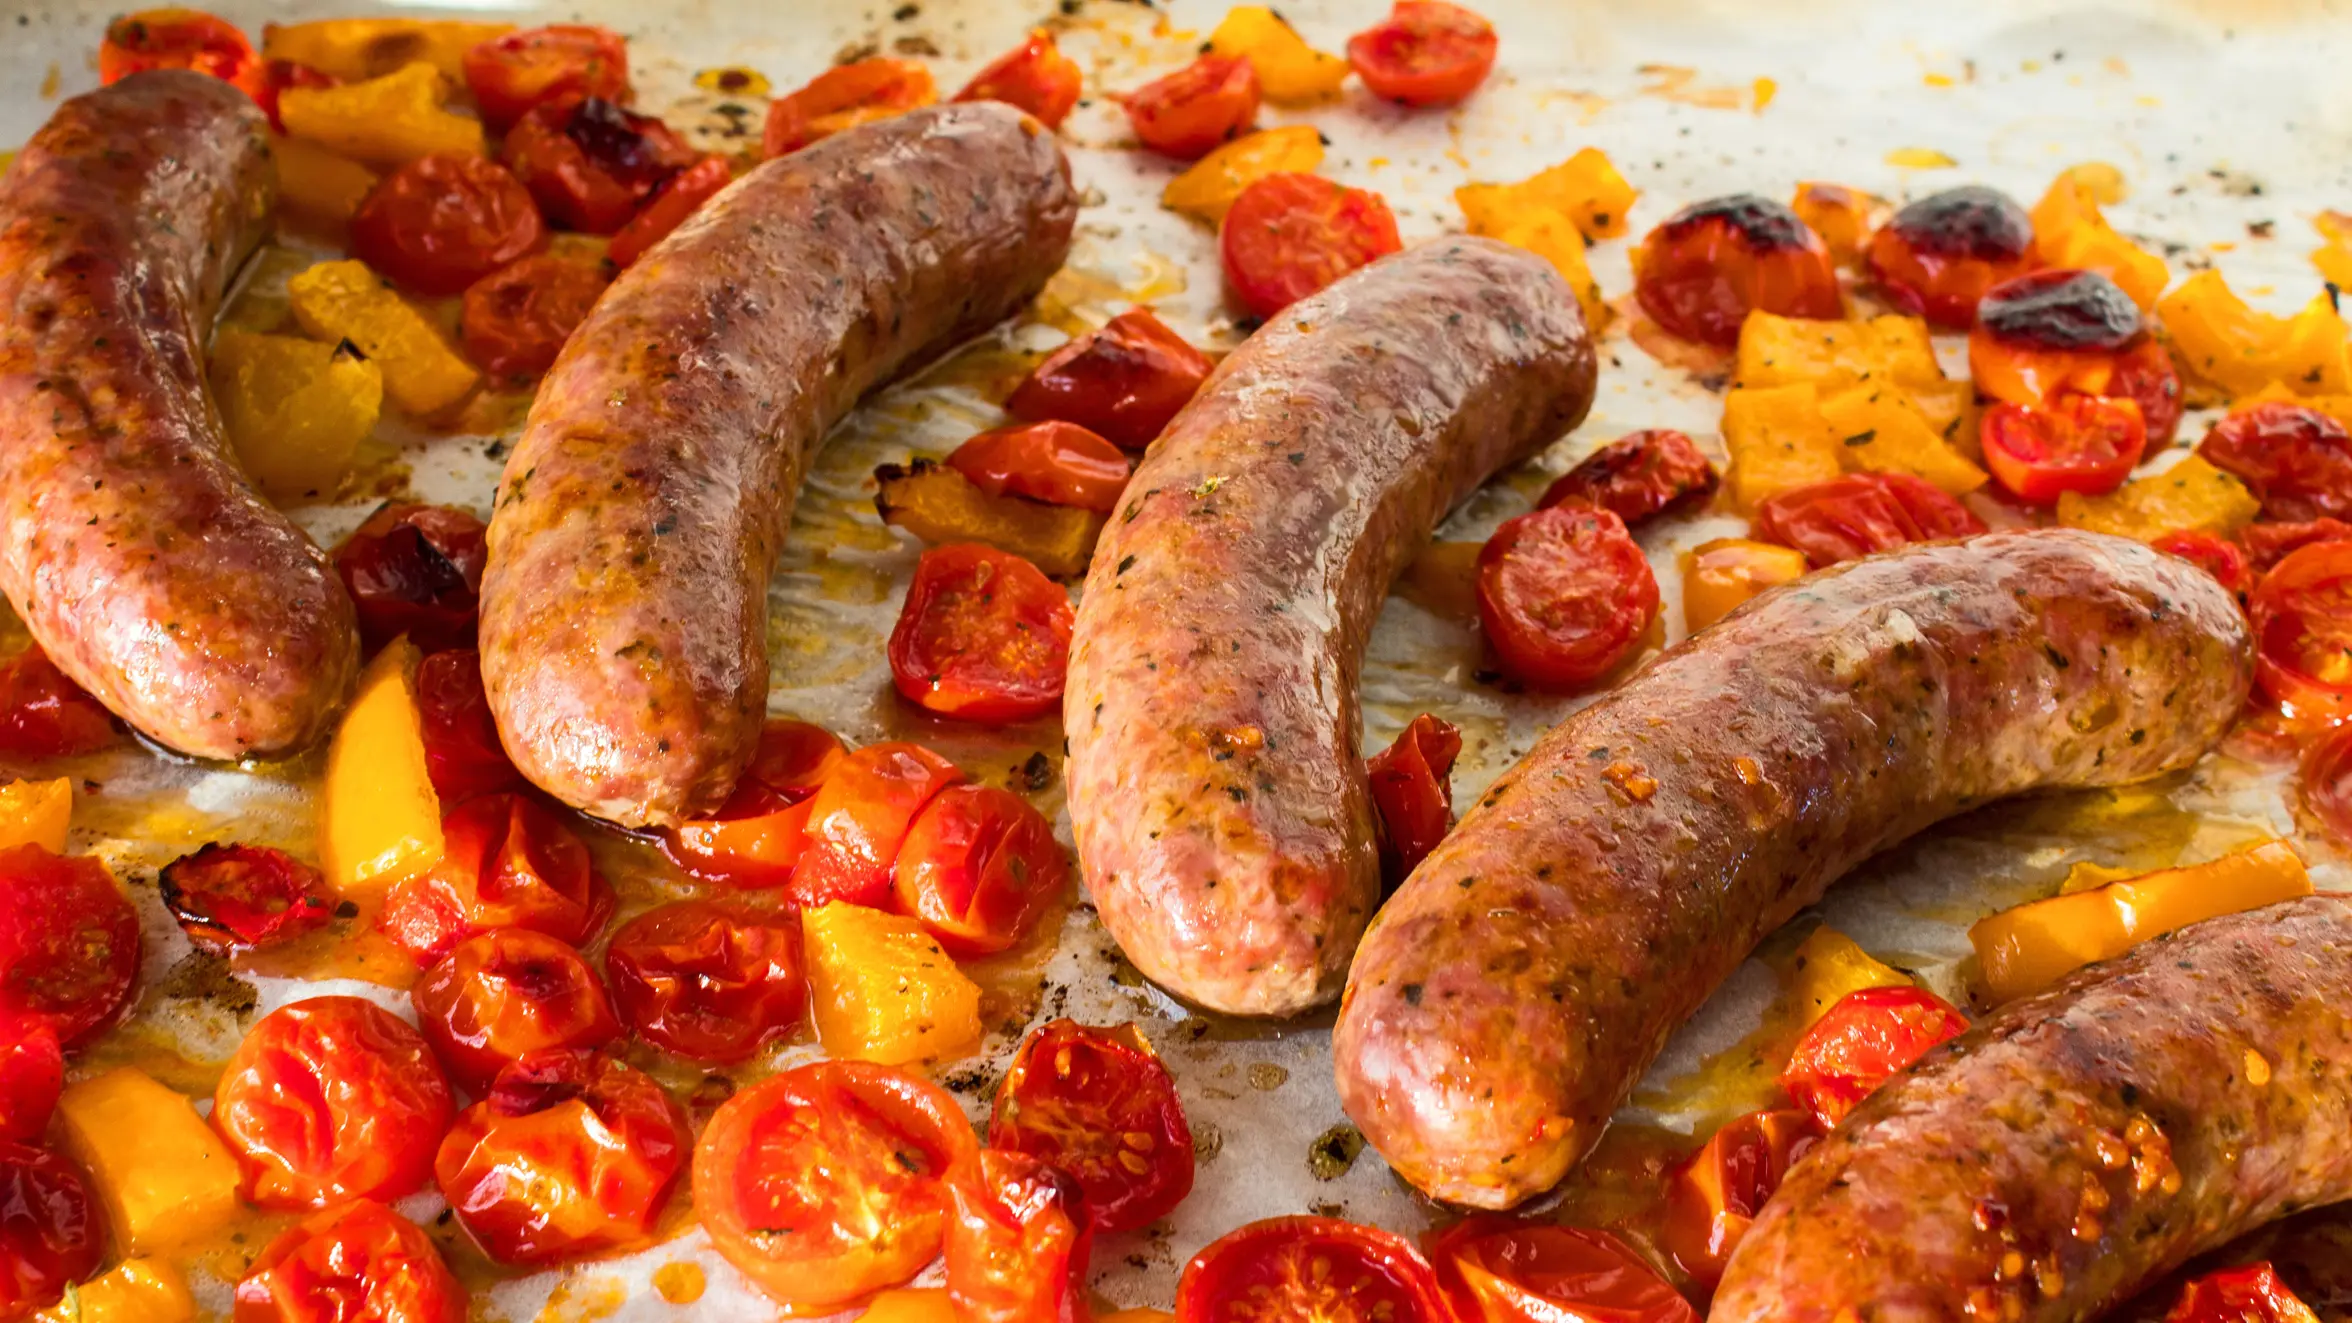 baked italian sausages right out of the oven with cherry tomatoes and peppers.